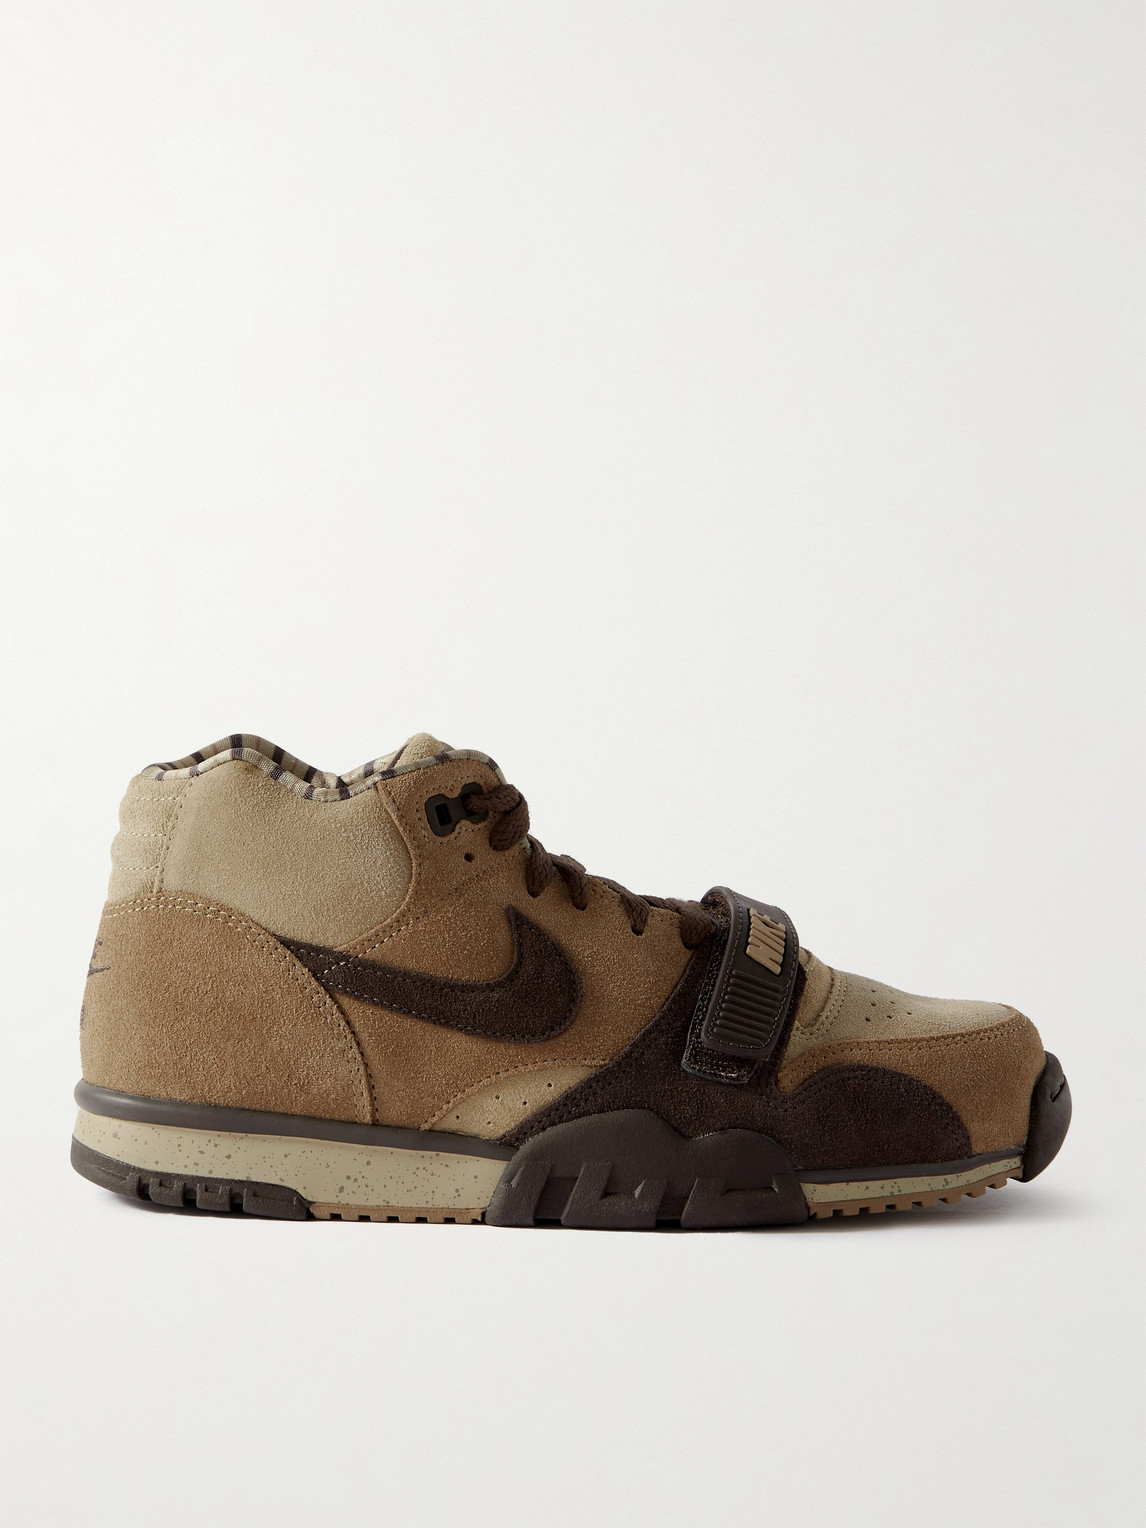 NIKE AIR TRAINER 1 LEATHER-TRIMMED SUEDE trainers